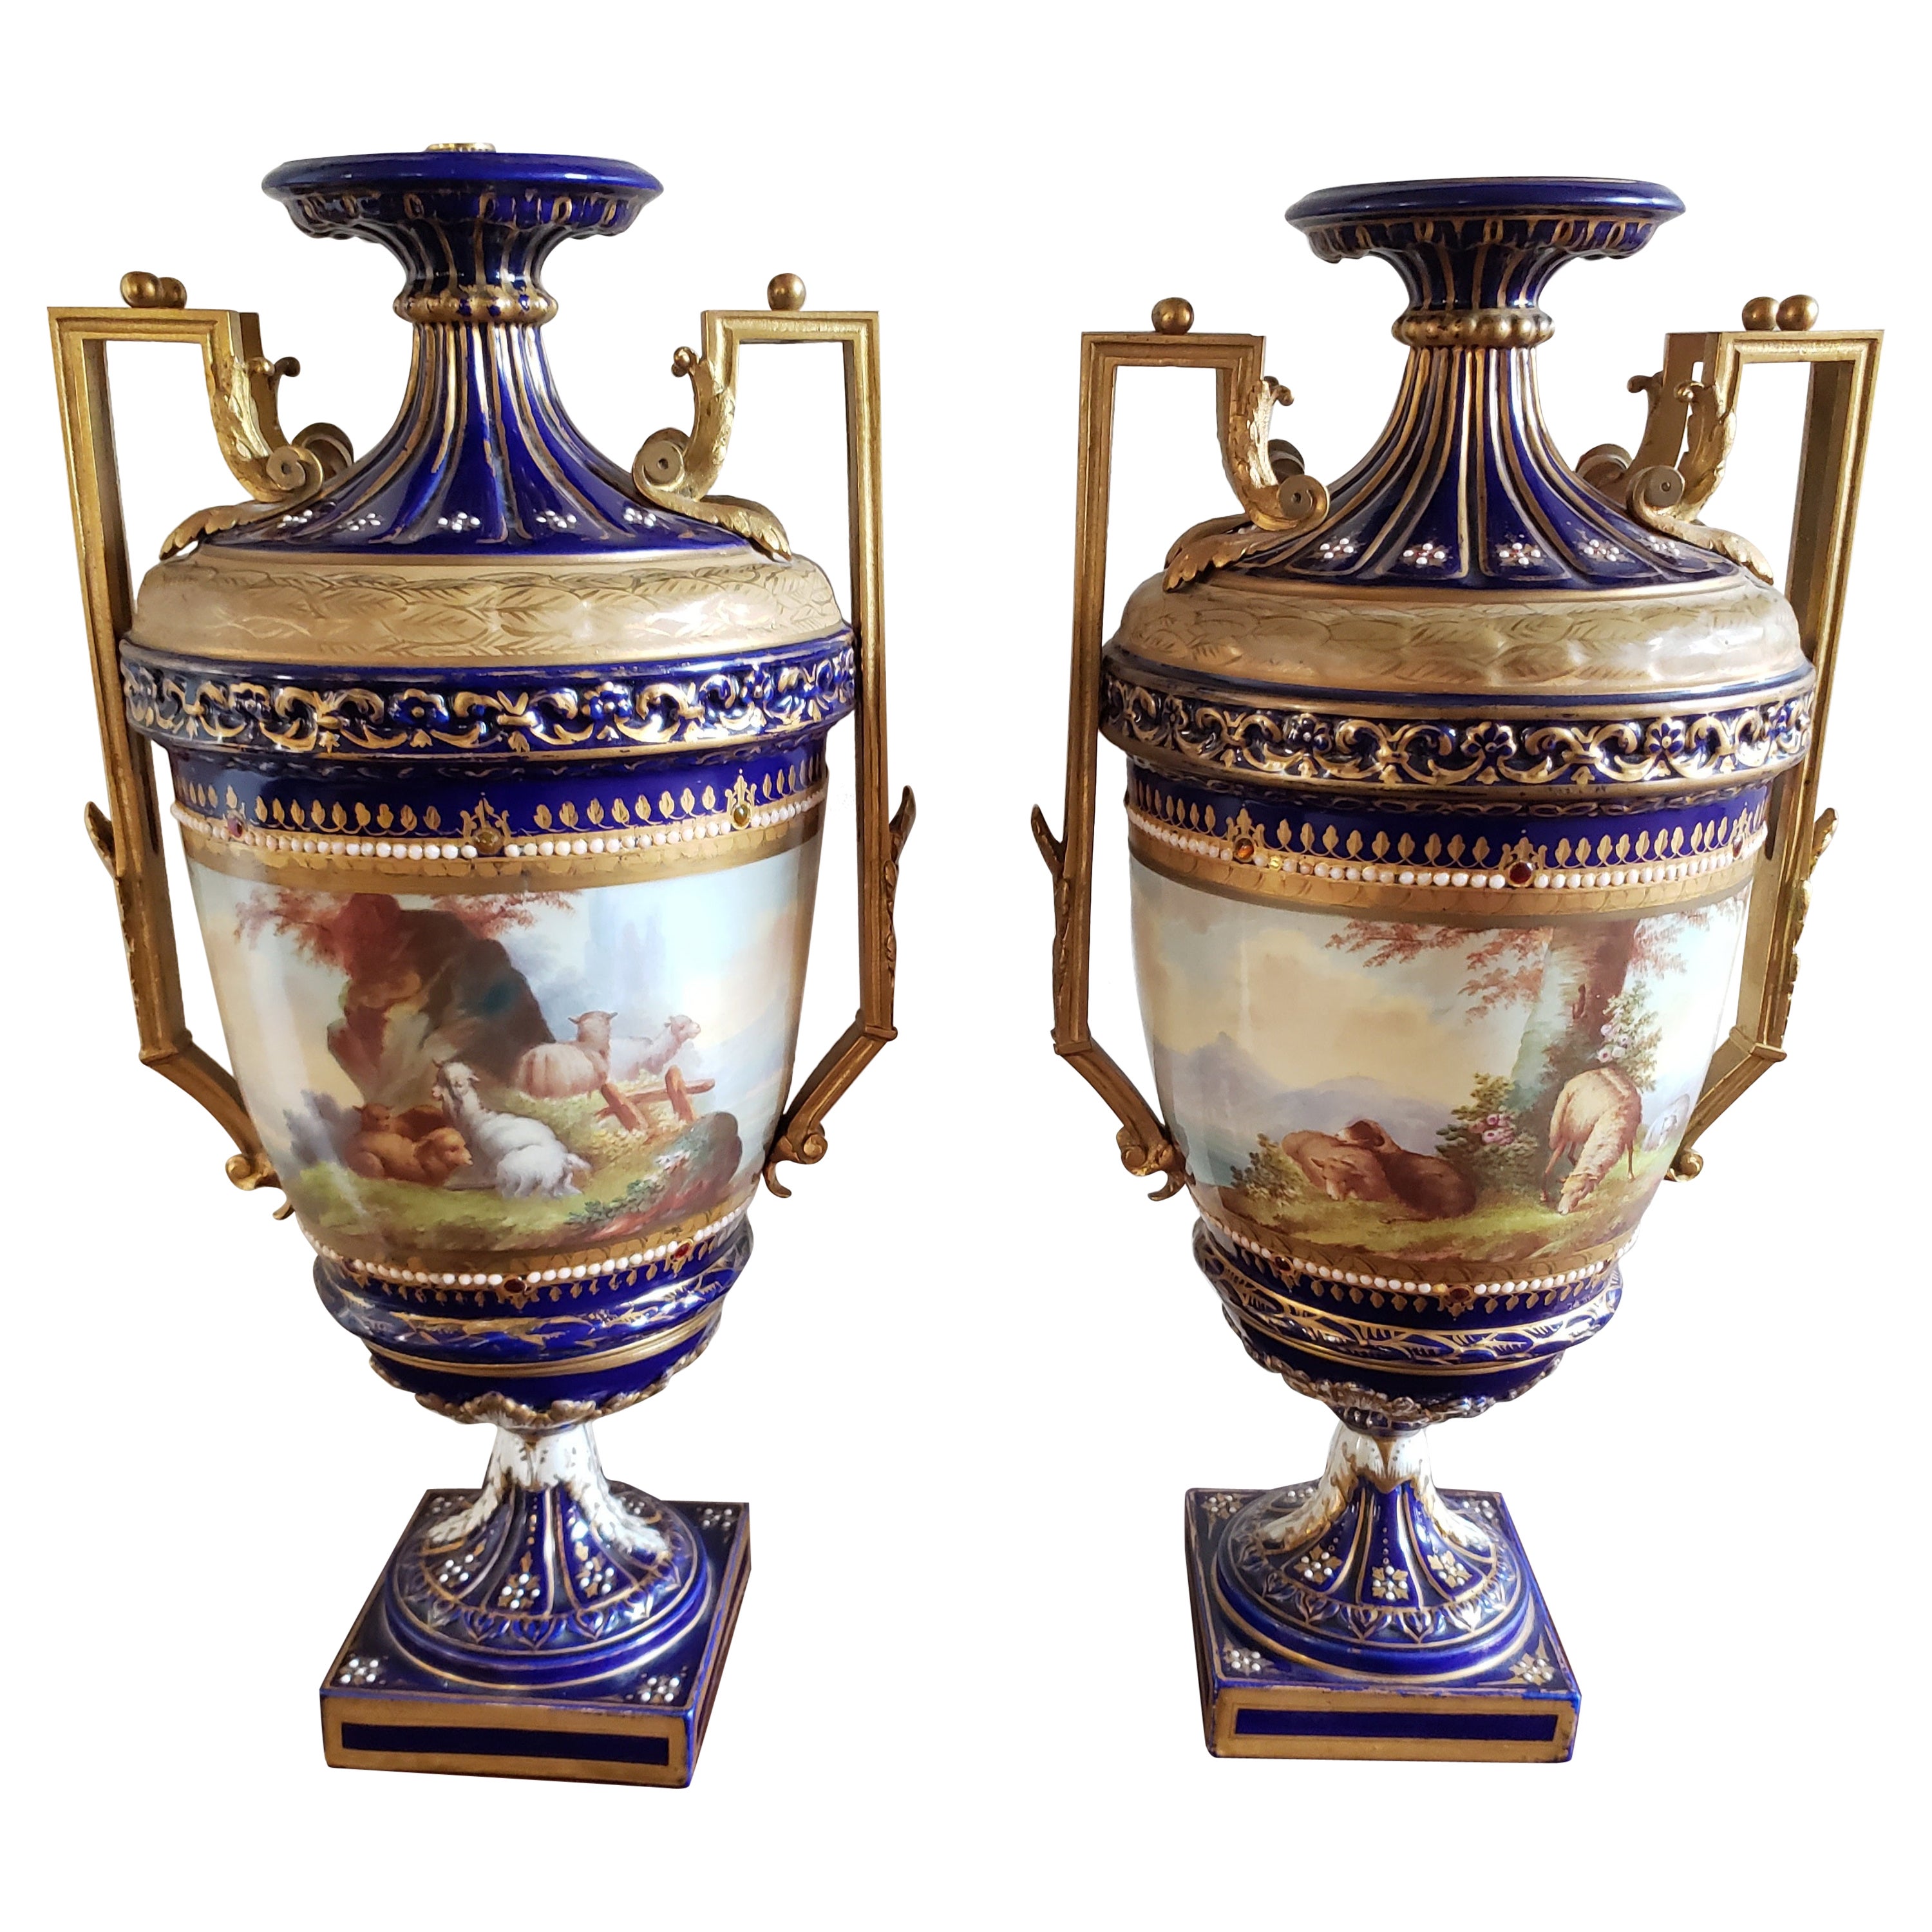 Pair of 19th Century Sevres Porcelain Hand Painted Cobalt & Gilt Decorated Urns For Sale